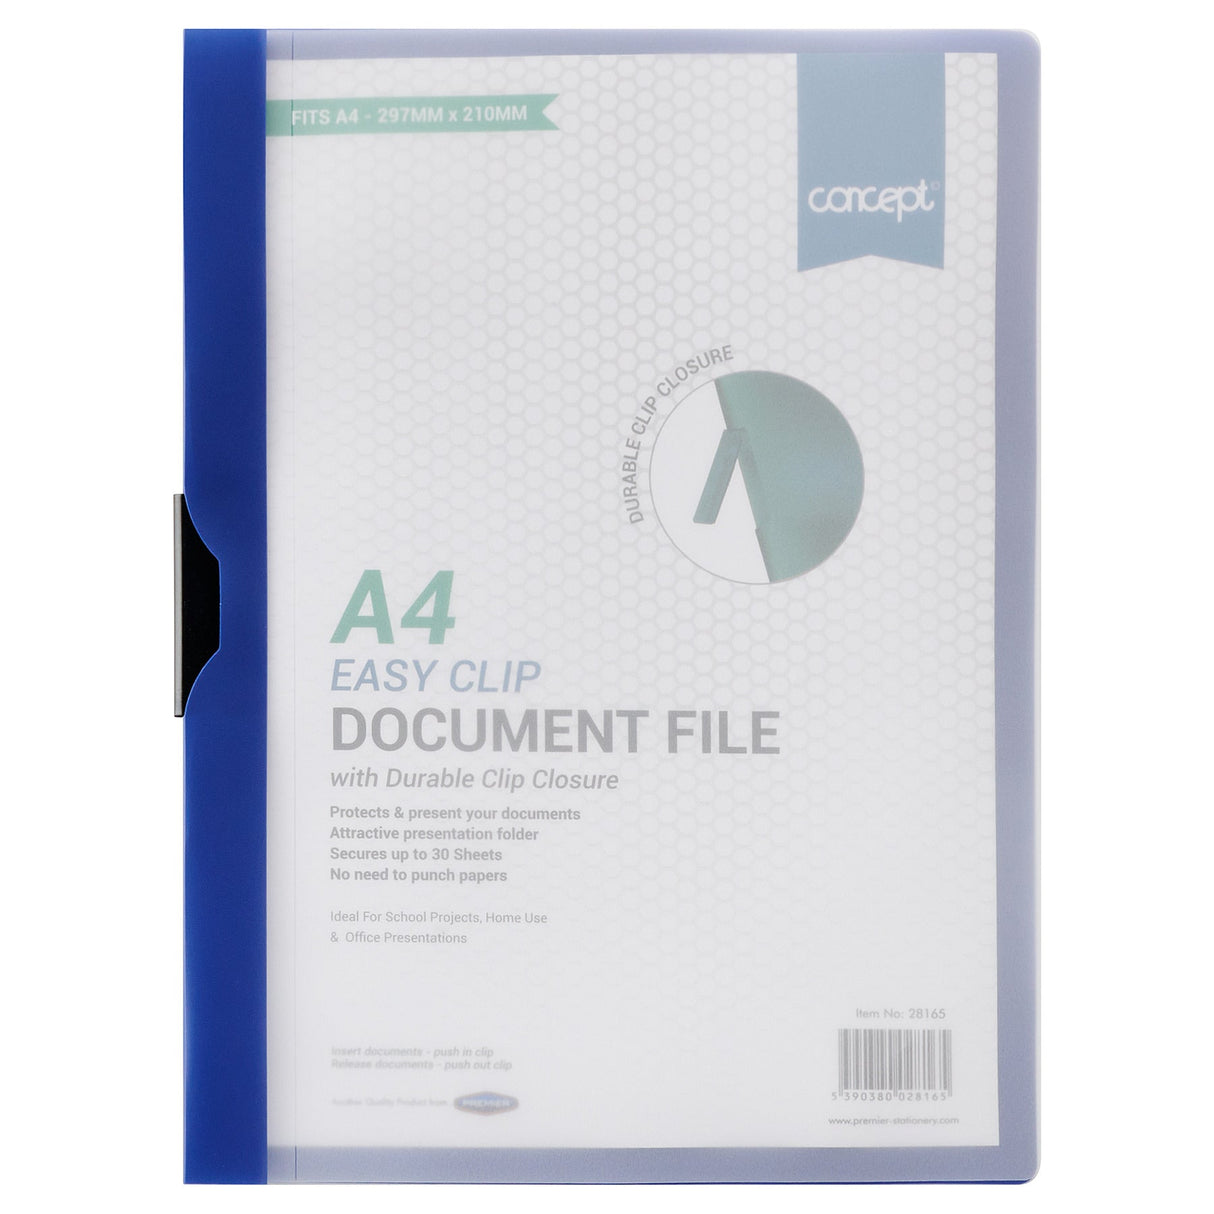 Concpet A4 Easy Clip Document File | Stationery Shop UK